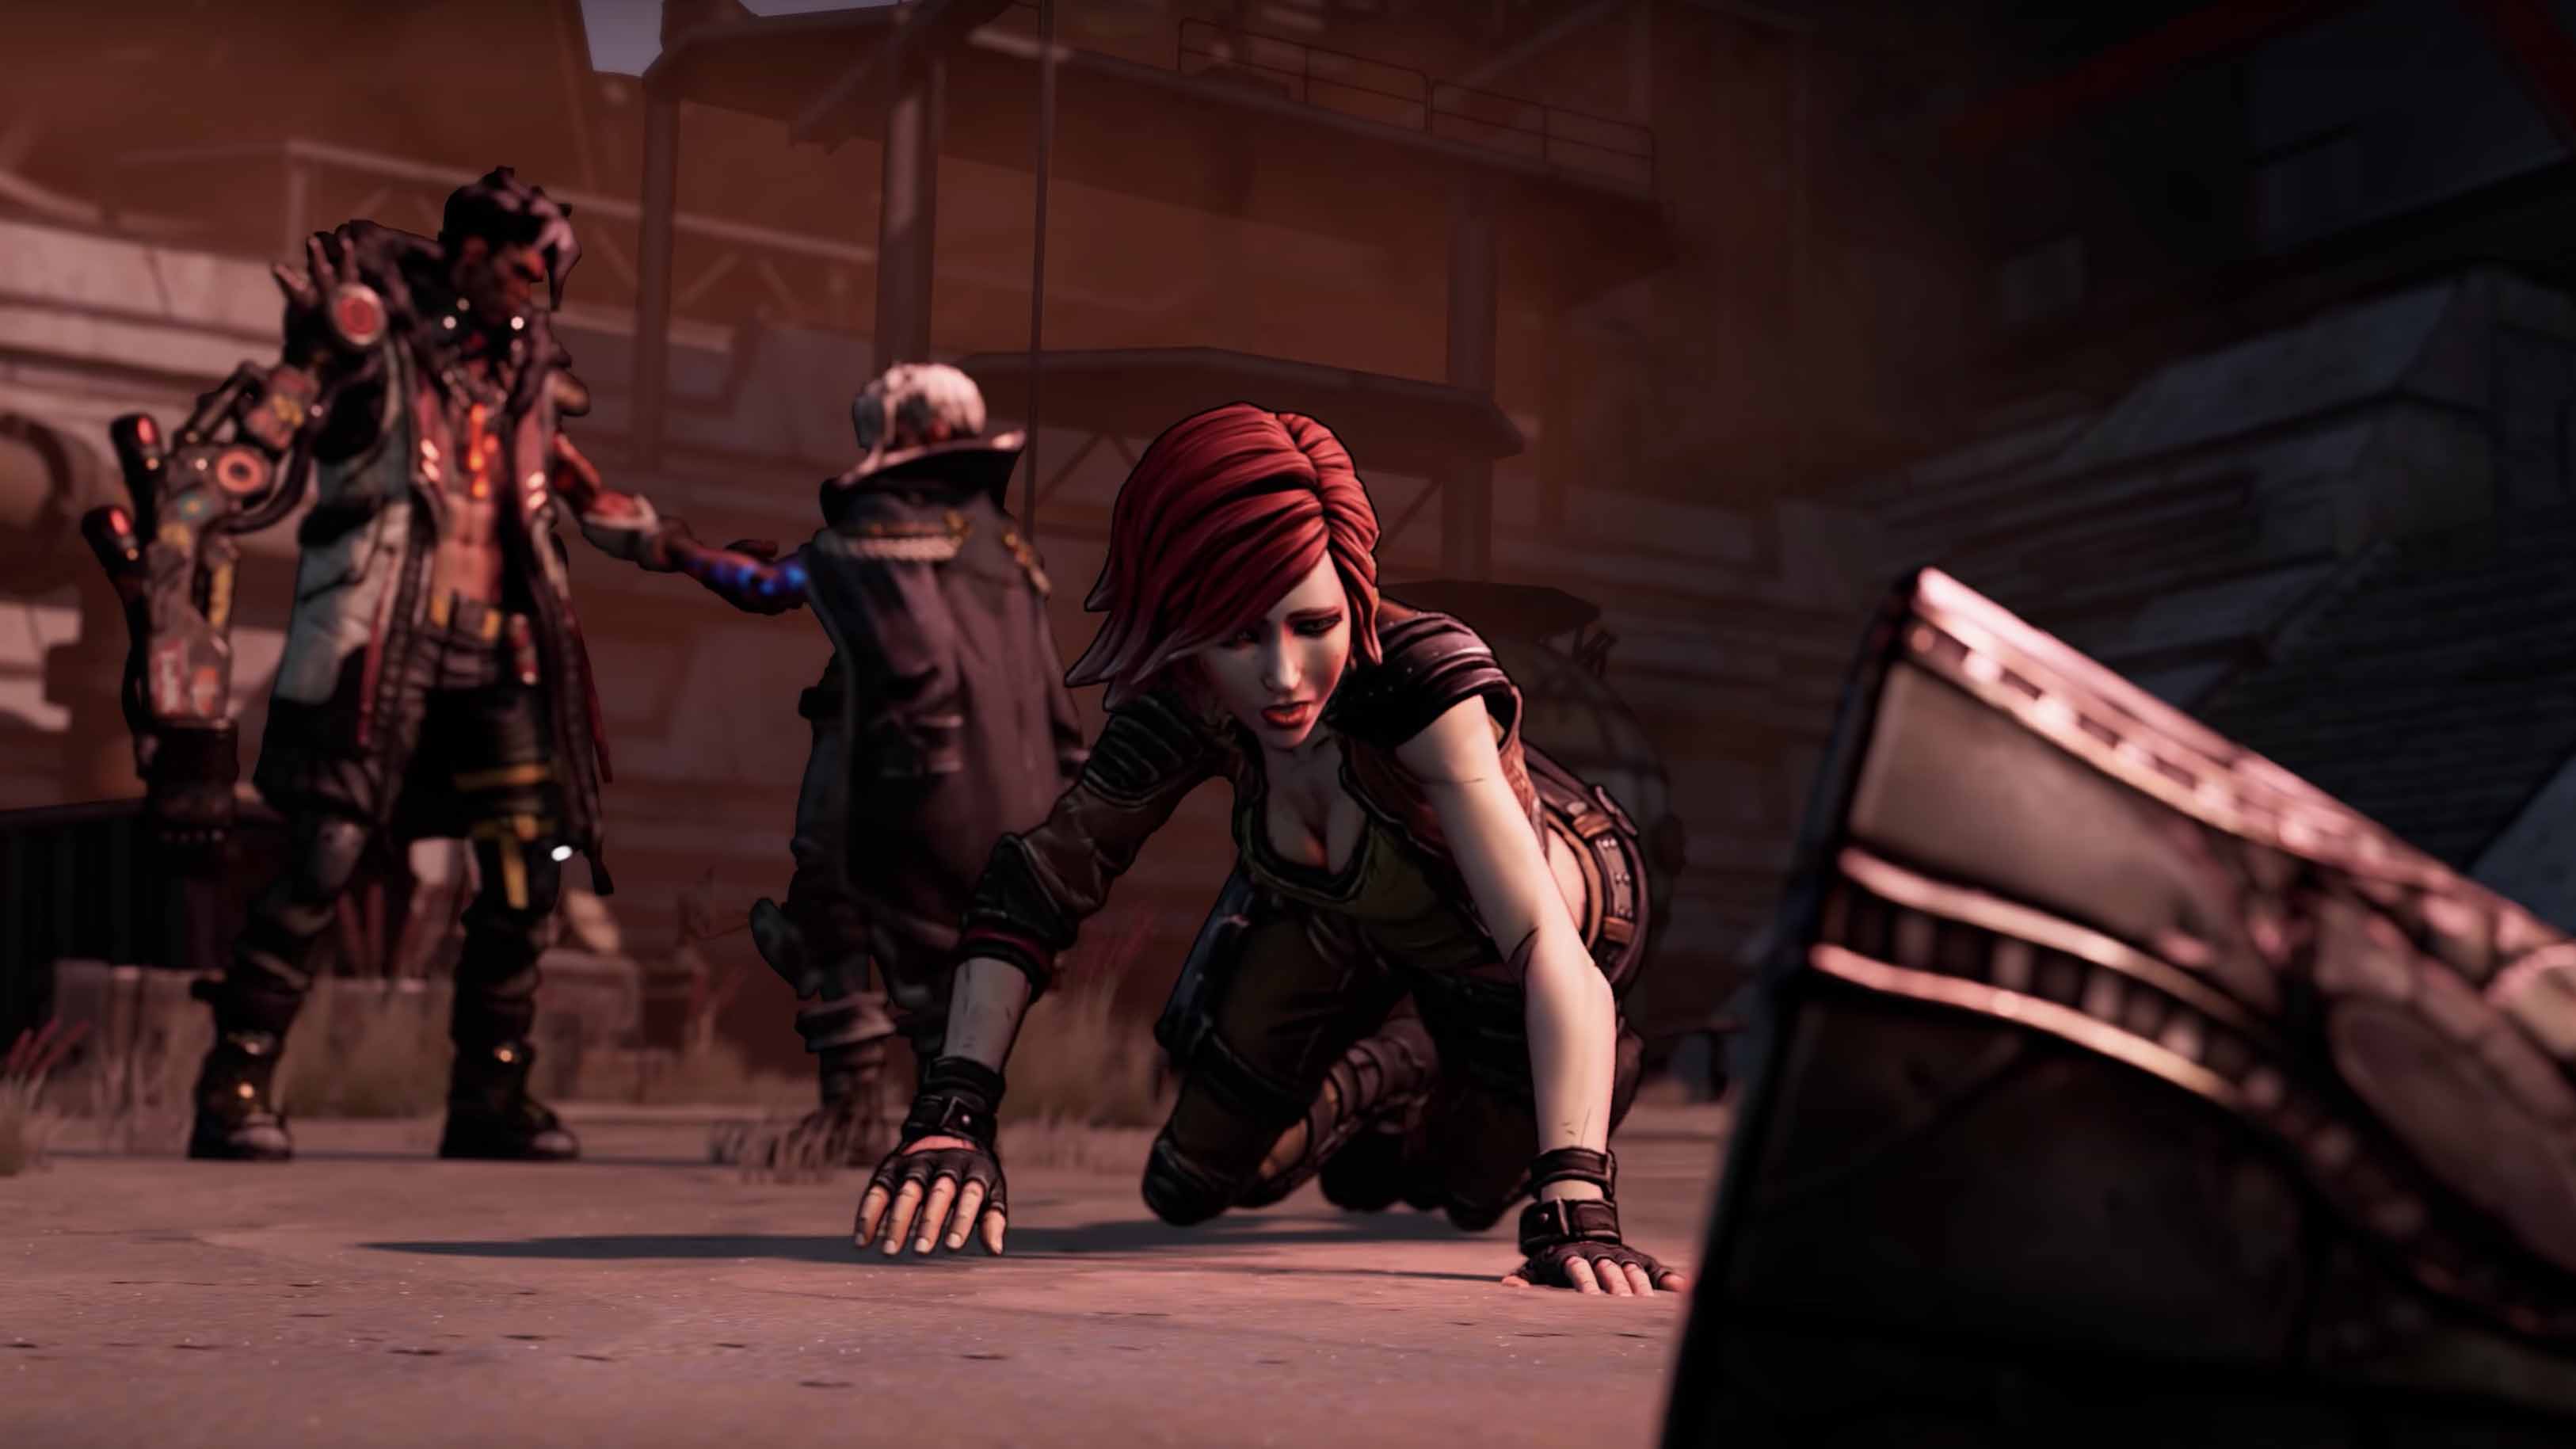 borderlands-2-is-reportedly-getting-a-new-dlc-to-pave-the-way-for-borderlands-3-techradar